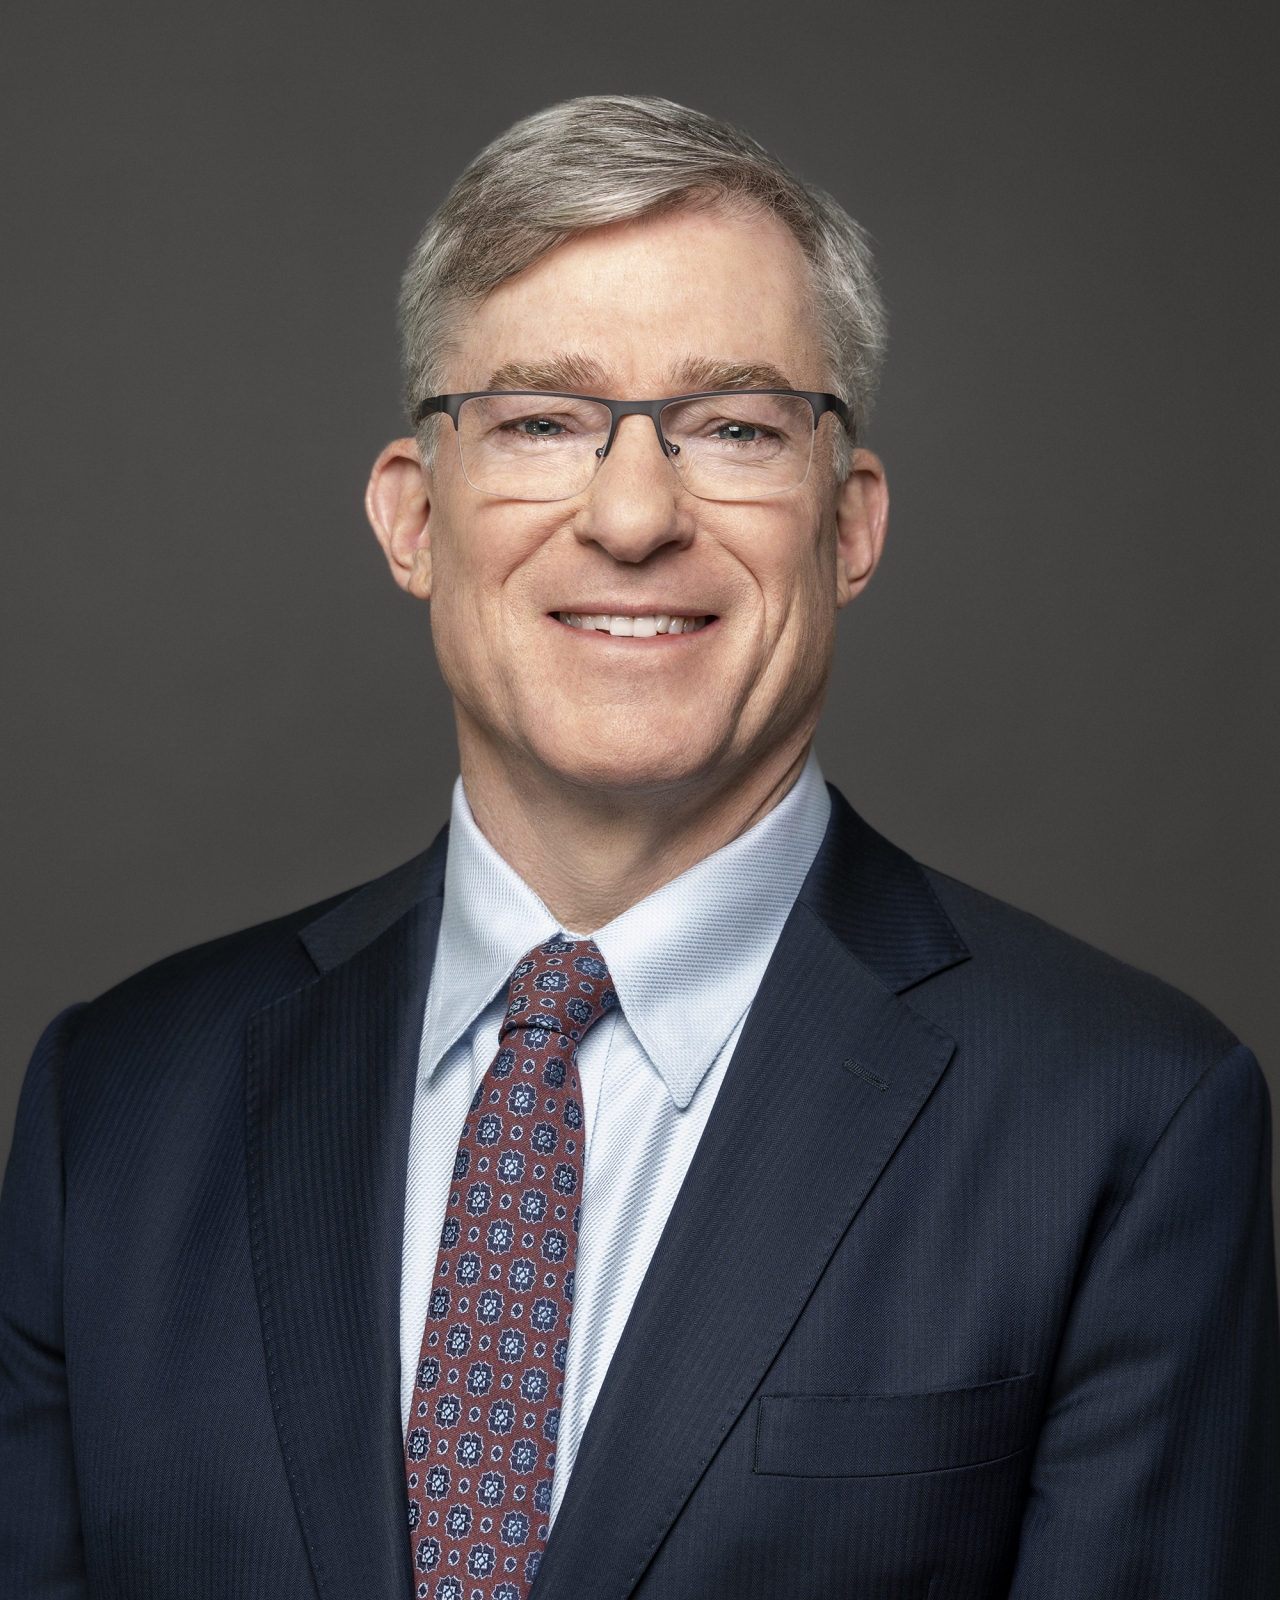 Rockwell Automation Chairman and CEO Blake Moret